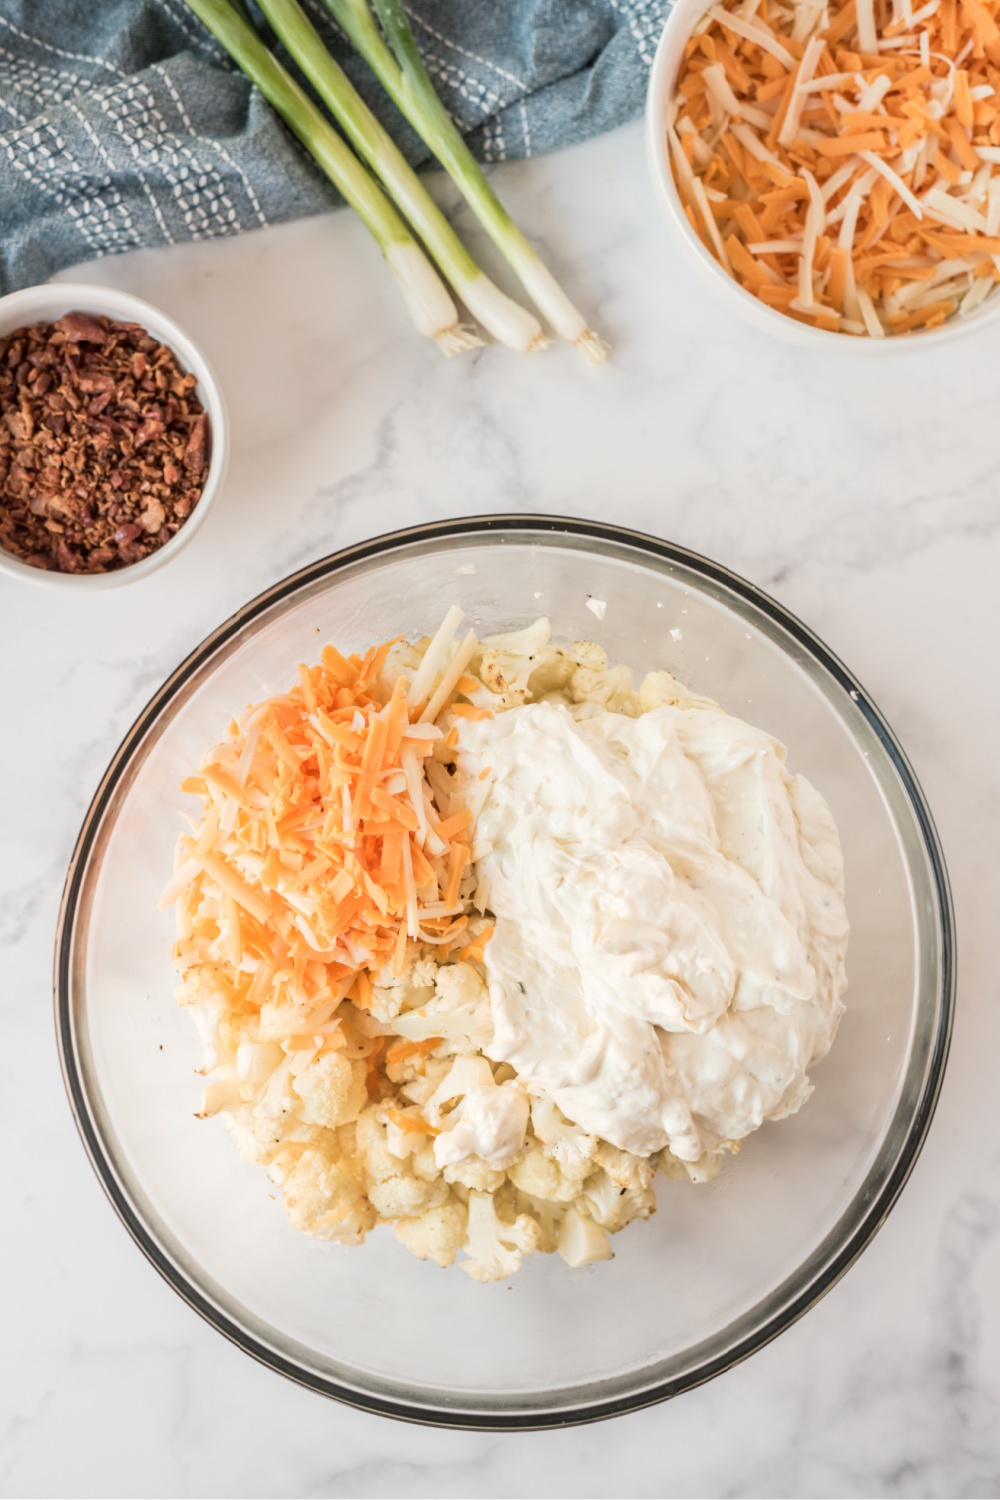 Roasted cauliflower, sauce and shredded cheese in a glass bowl